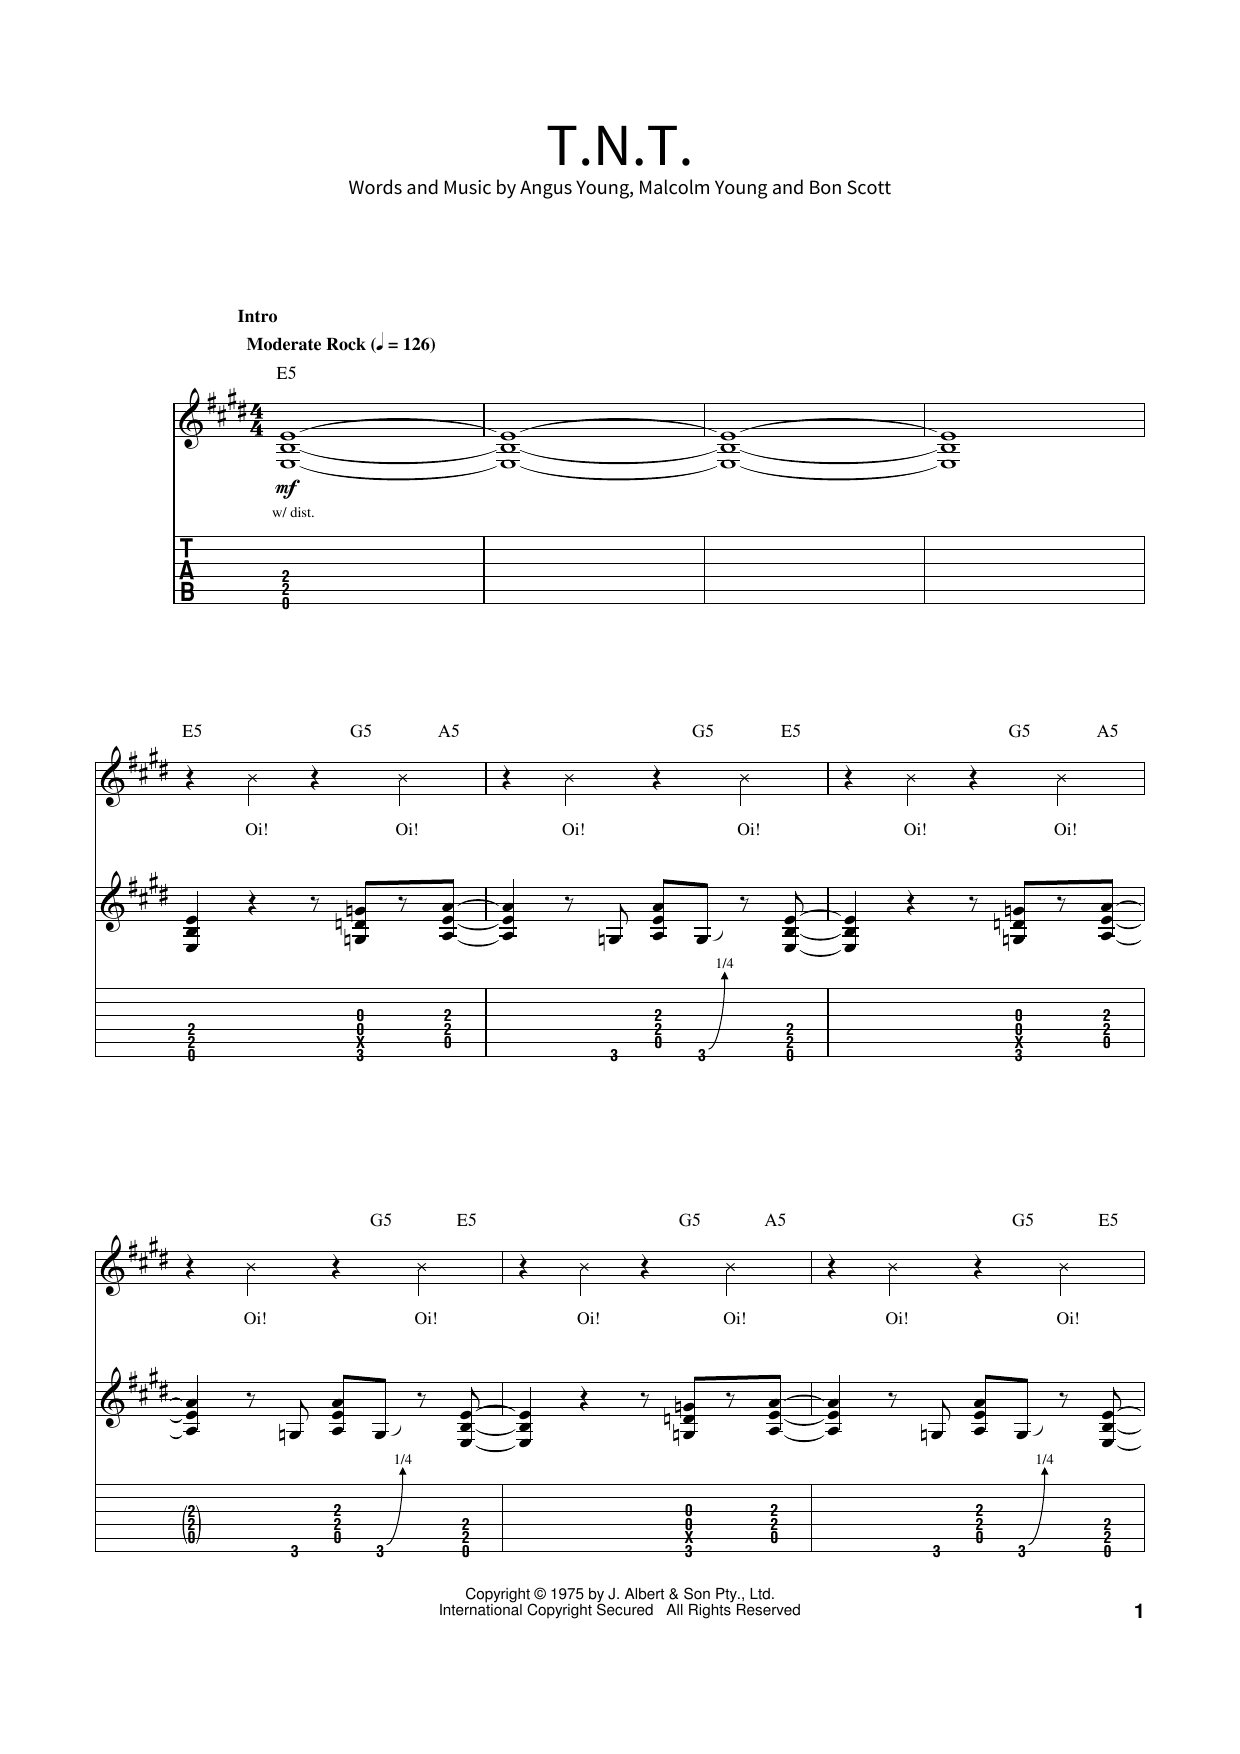 AC/DC T.N.T. sheet music notes and chords. Download Printable PDF.